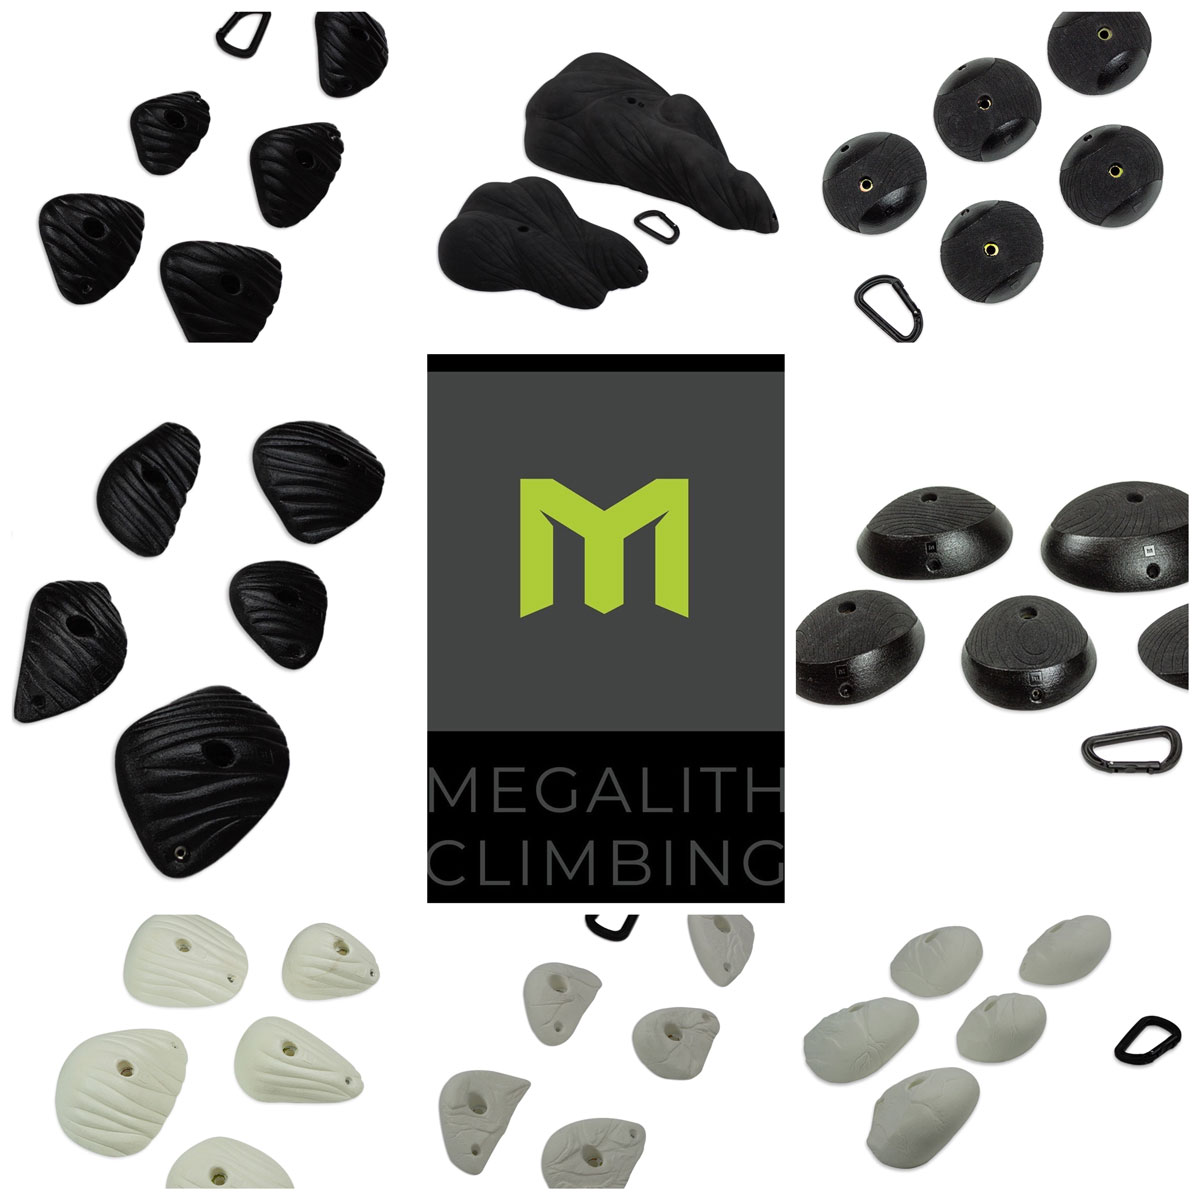 Various Megalith holds